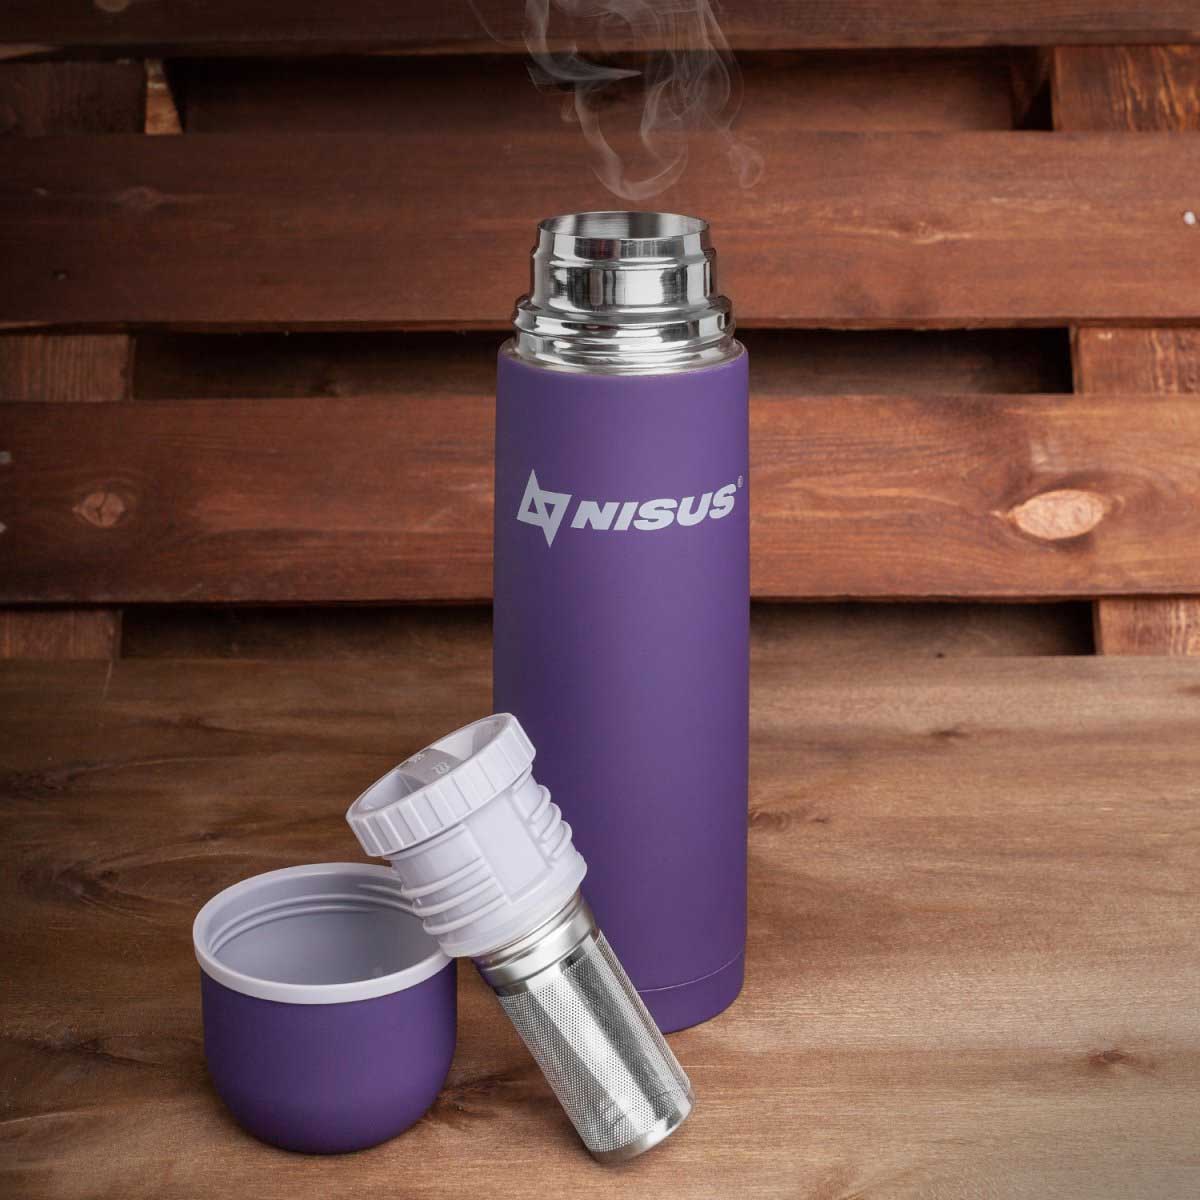 Portable Insulated Water Flask with Strainer, Purple, 25 oz with hot drink inside is standing on the wooden bench